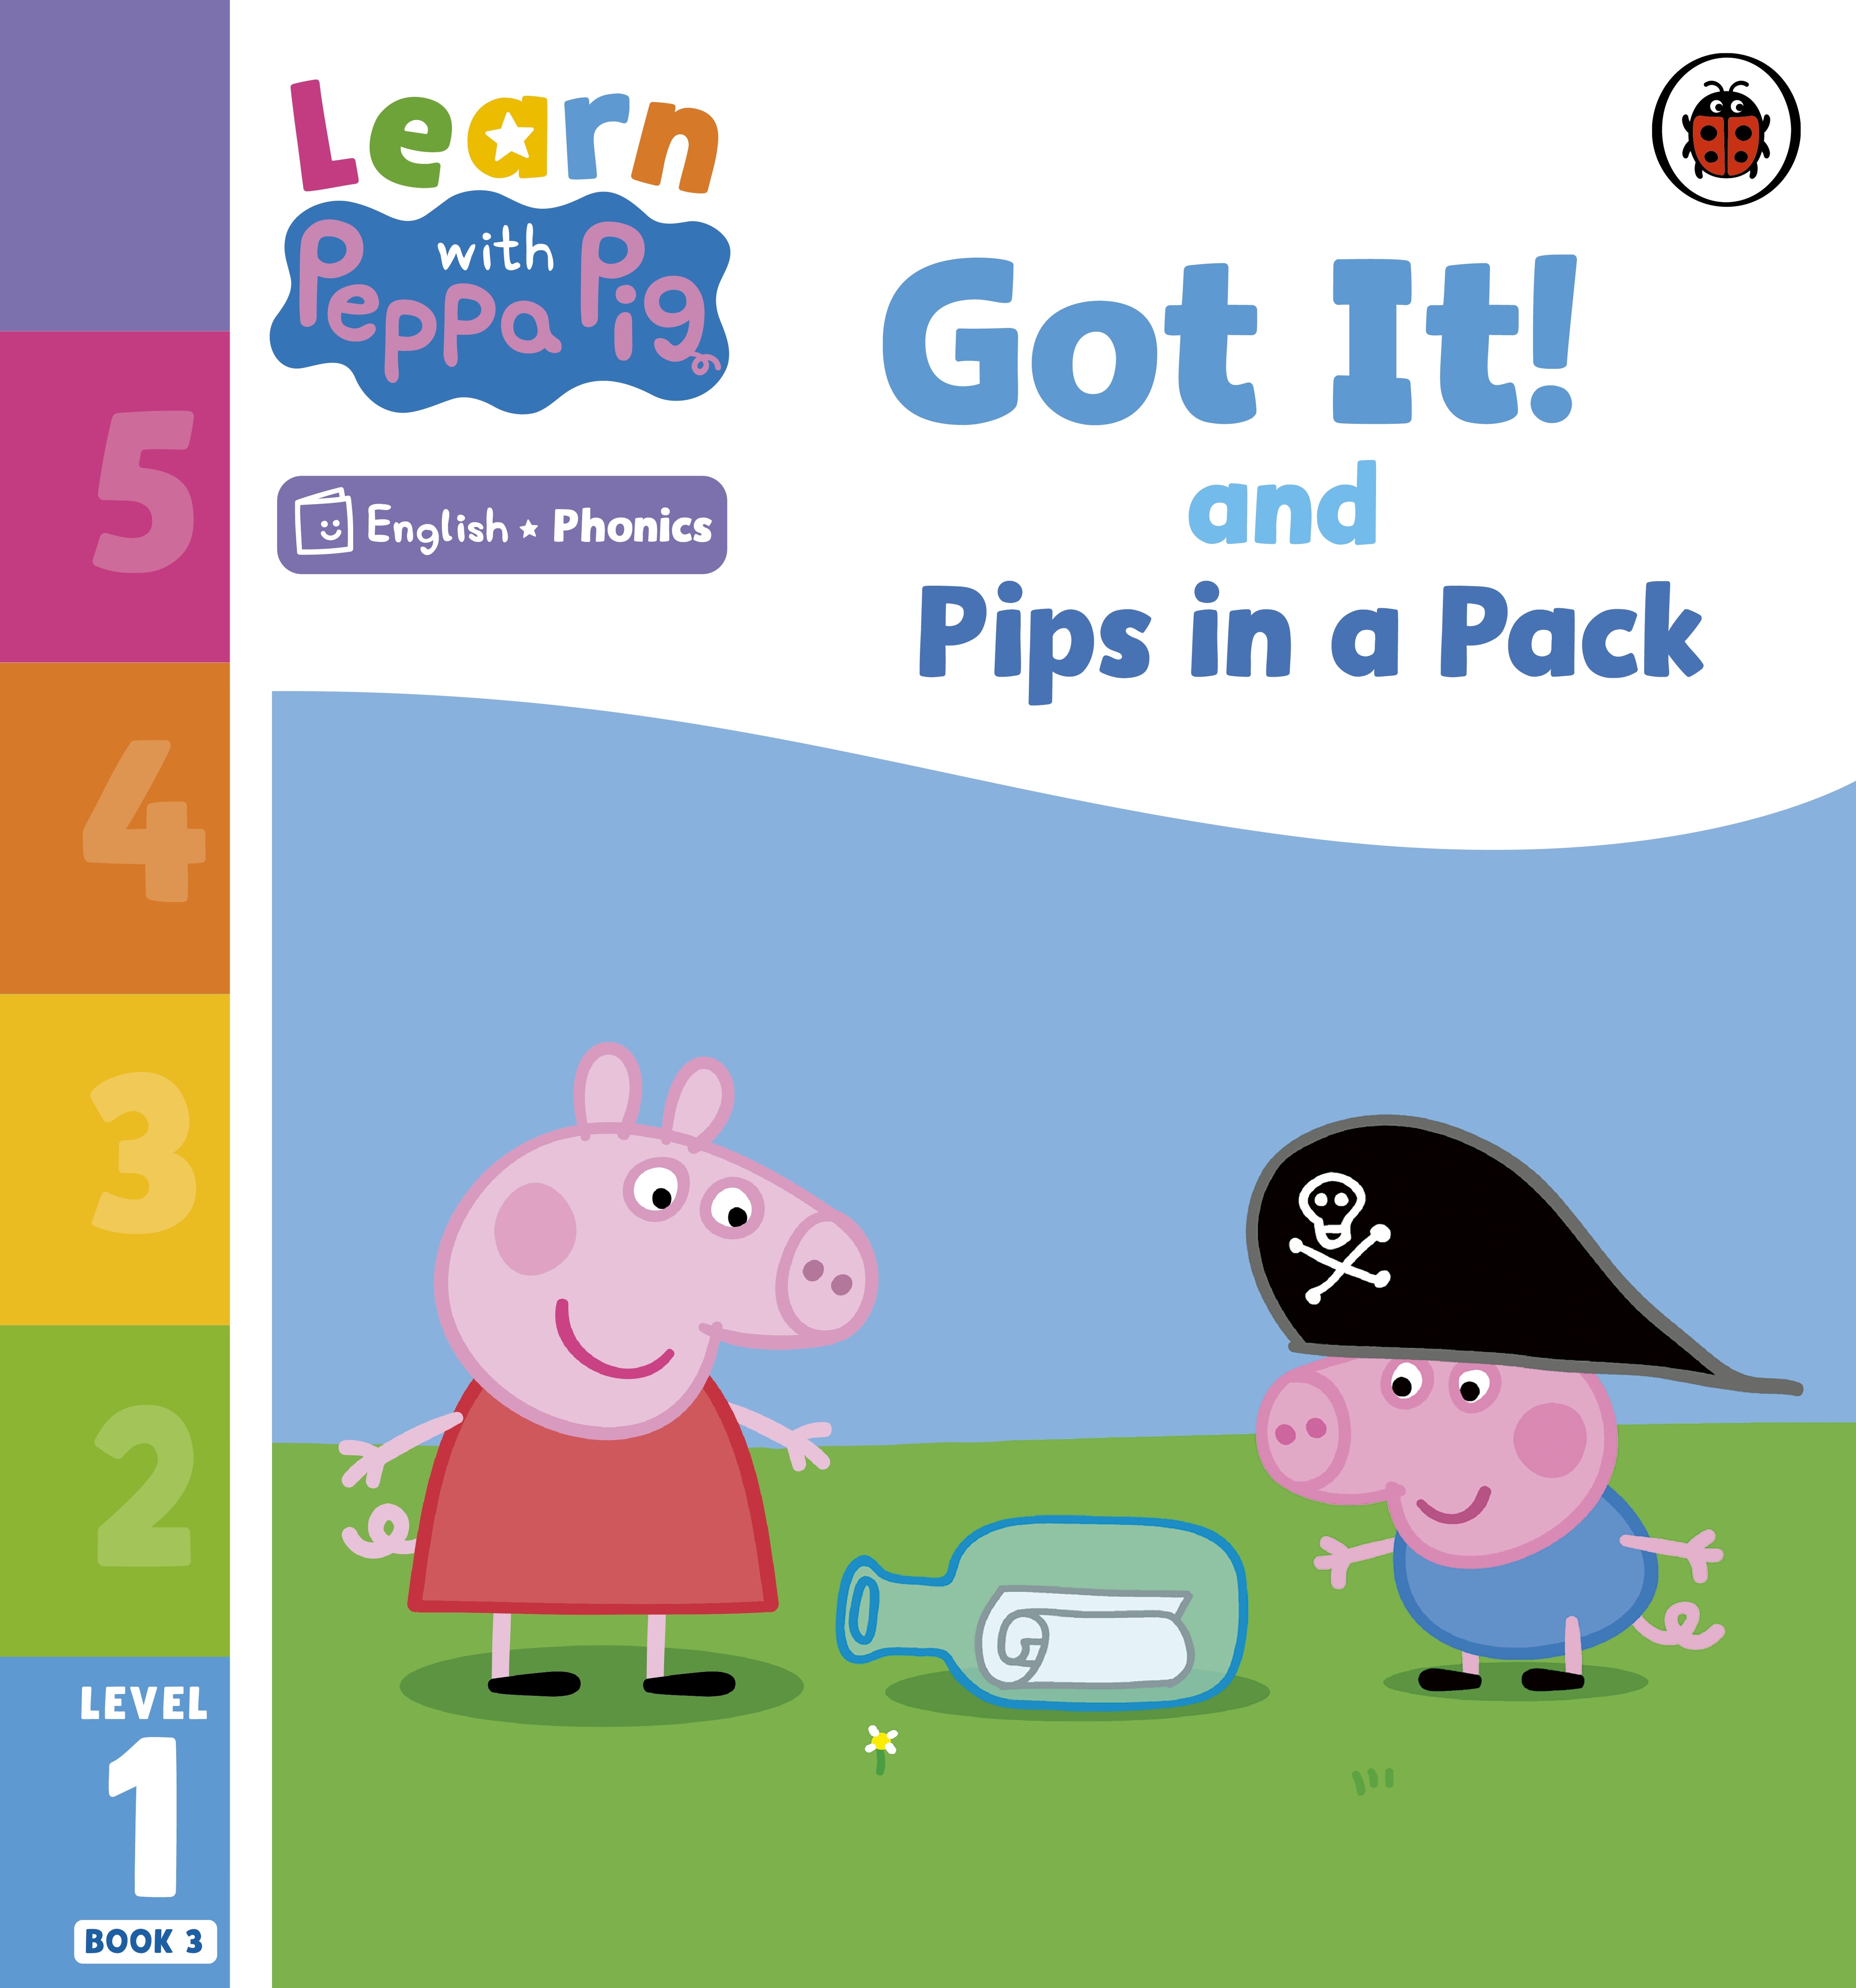 Book “Learn with Peppa Phonics Level 1 Book 3 — Got It! and Pips in a Pack (Phonics Reader)” by Peppa Pig — January 5, 2023